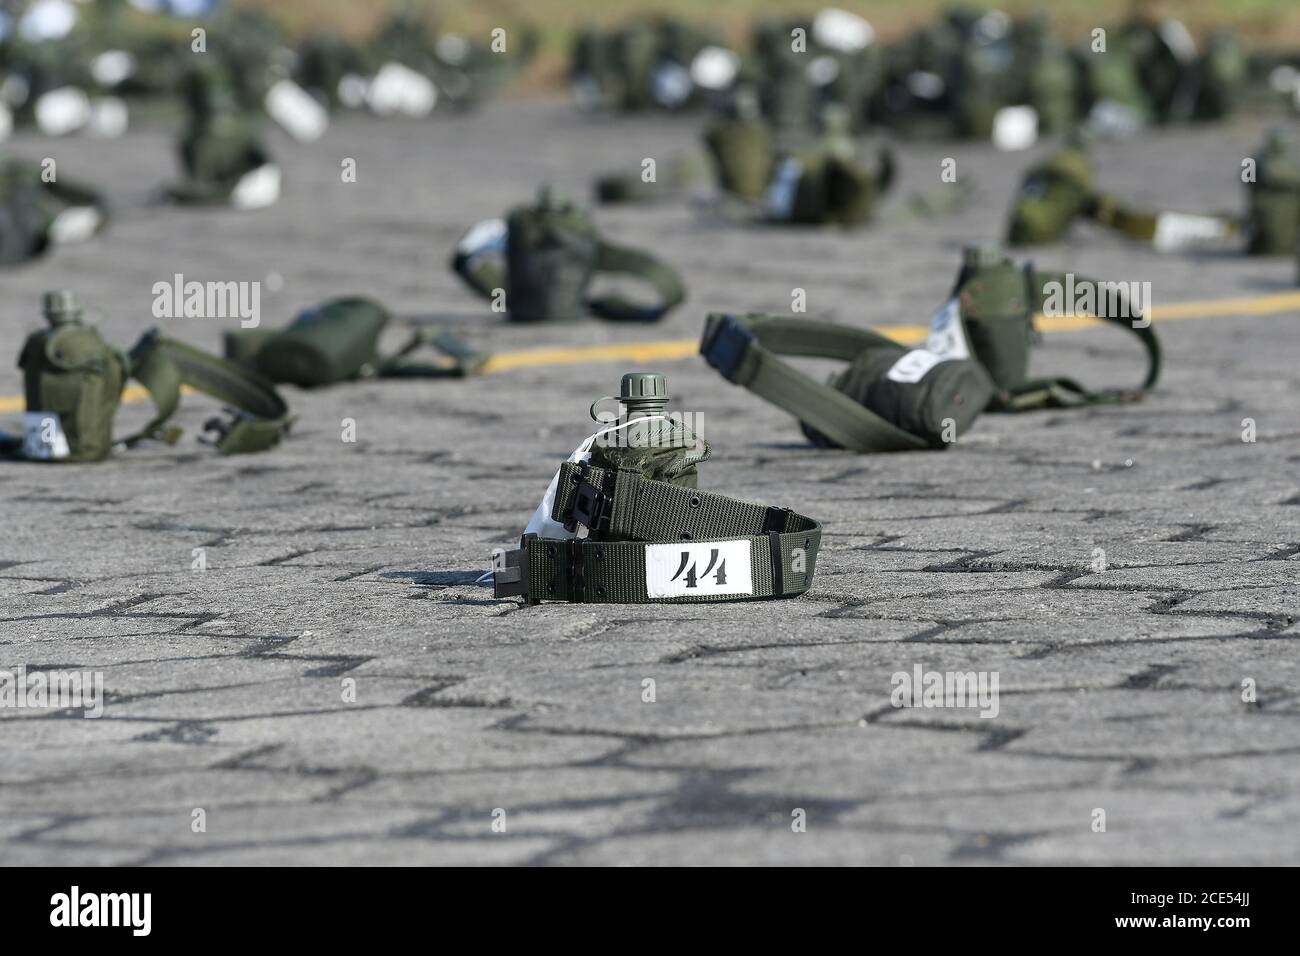 Rio de Janeiro, July 25, 2020. Canteen of Brazilian Air Force soldiers on the ground at Campo dos Afonsos Air Base. Stock Photo